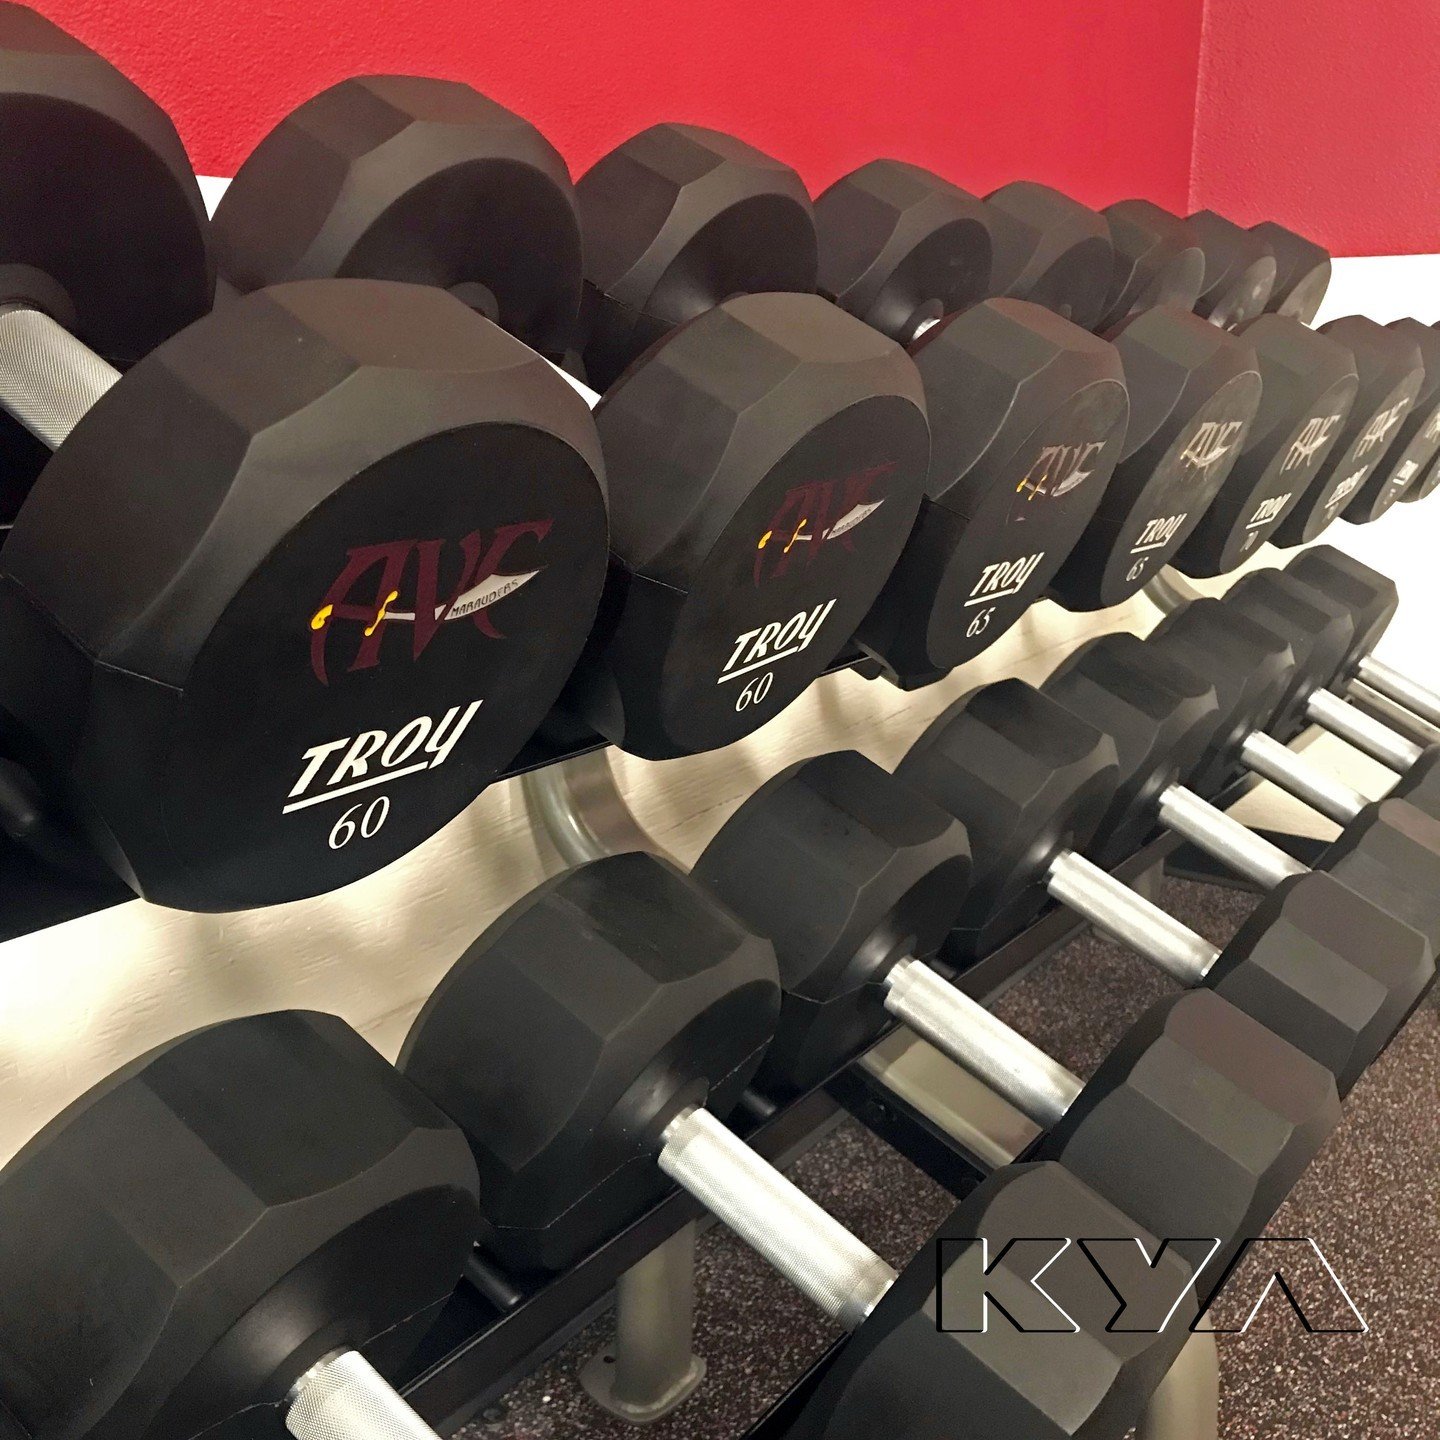 Weight rooms can be more than just a few weights and benches. They've become places where school pride is carried over from the sports field and into the student athletes daily routines. Antelope Valley College showcases there pride in many ways - in